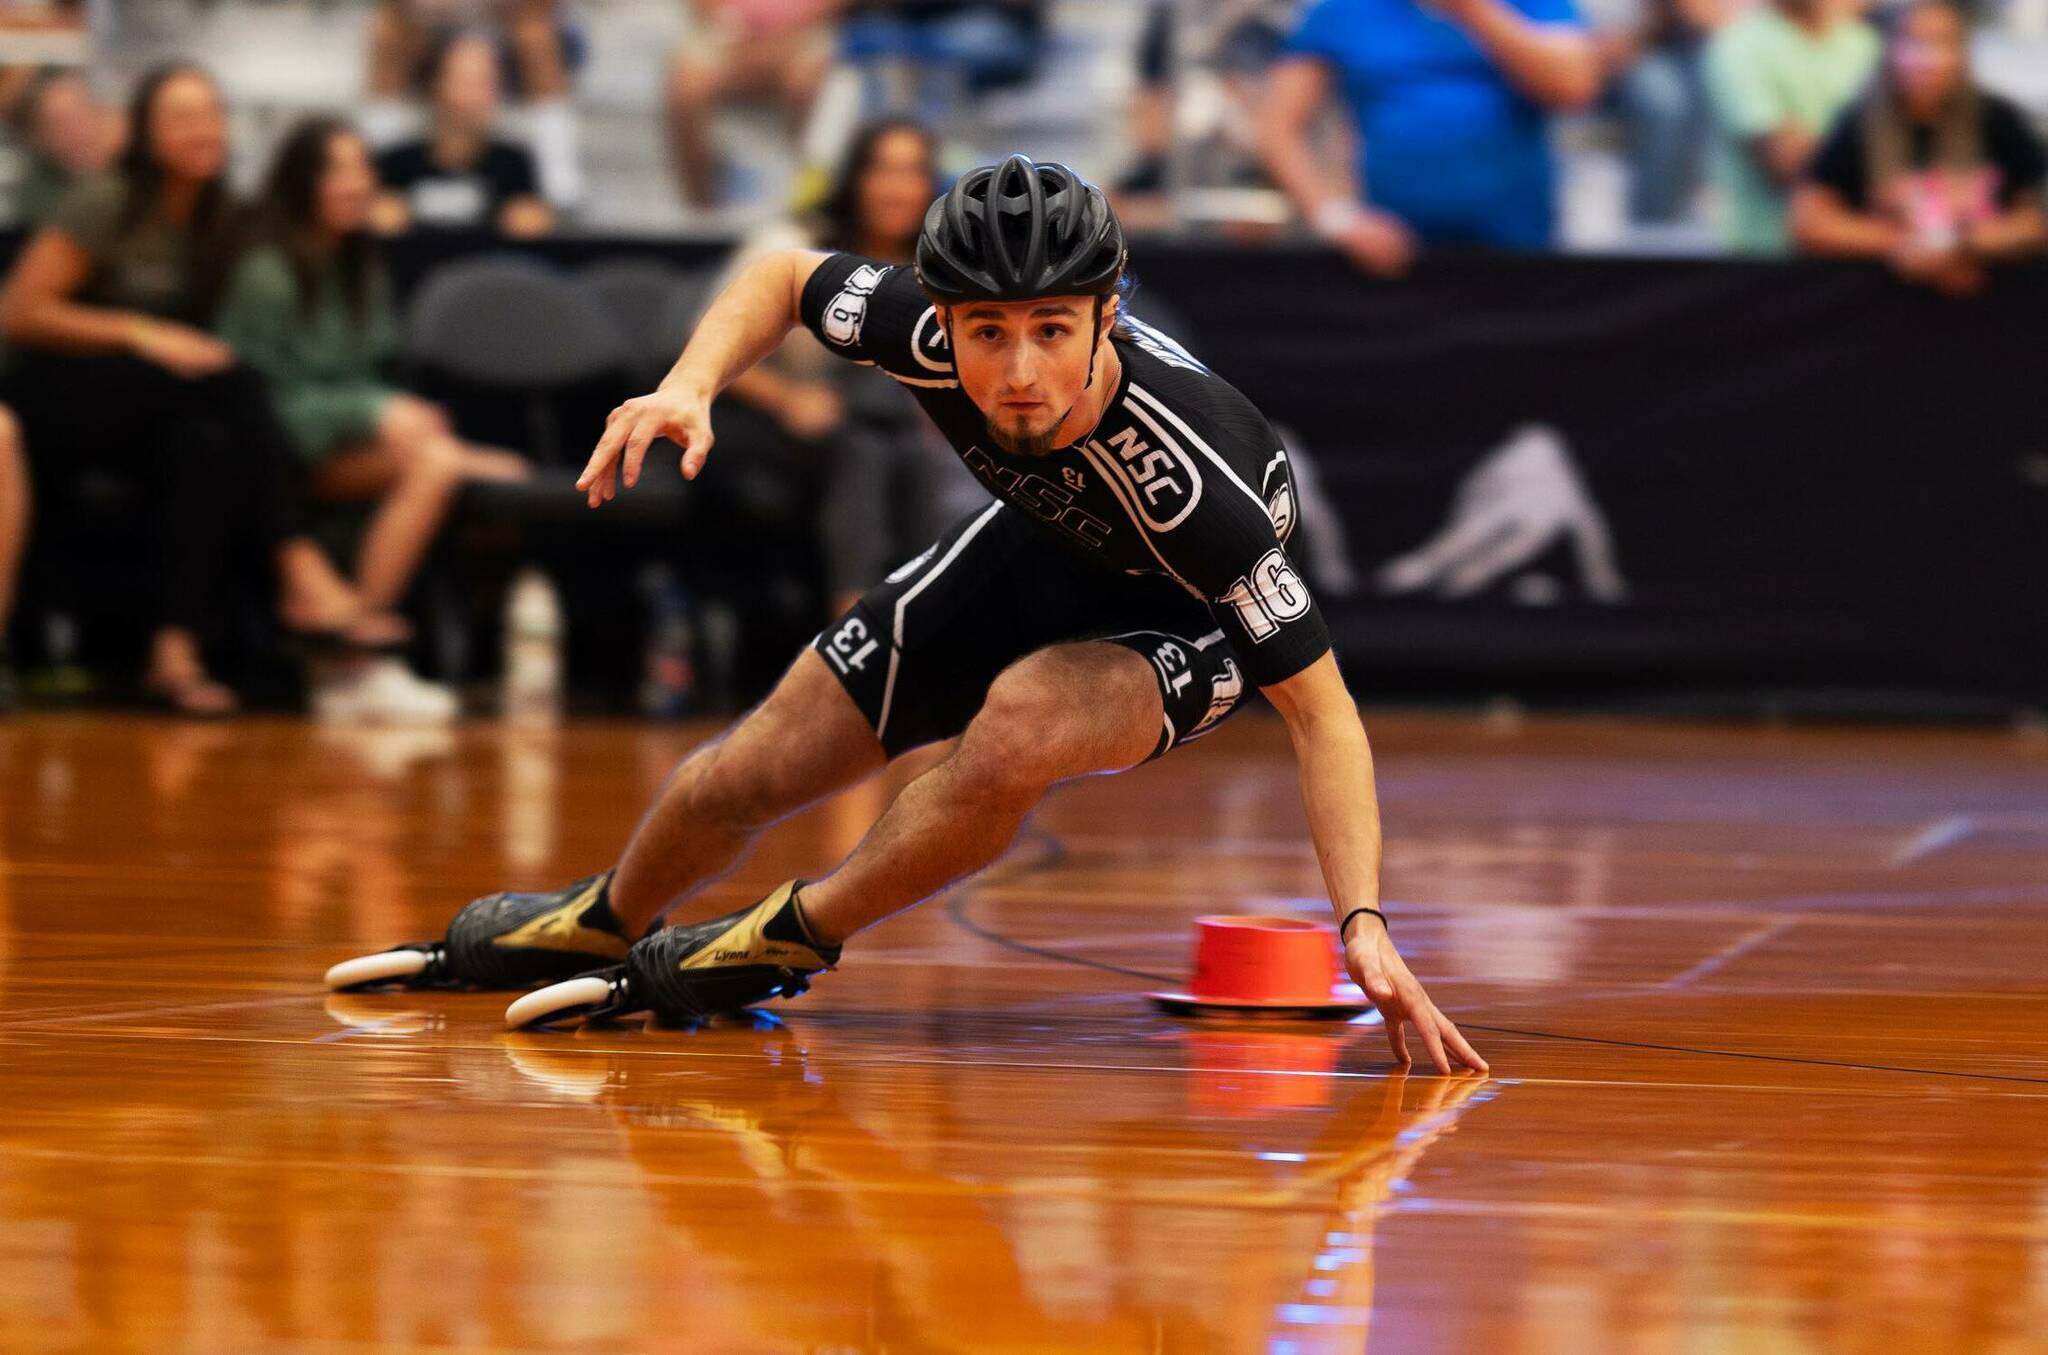 Photo courtesy National SpeedSkating Circuit
Skater Gabe Lyons navigates a turn at the USA Inline Speed Skating Nationals in Lincoln, NE, in July.